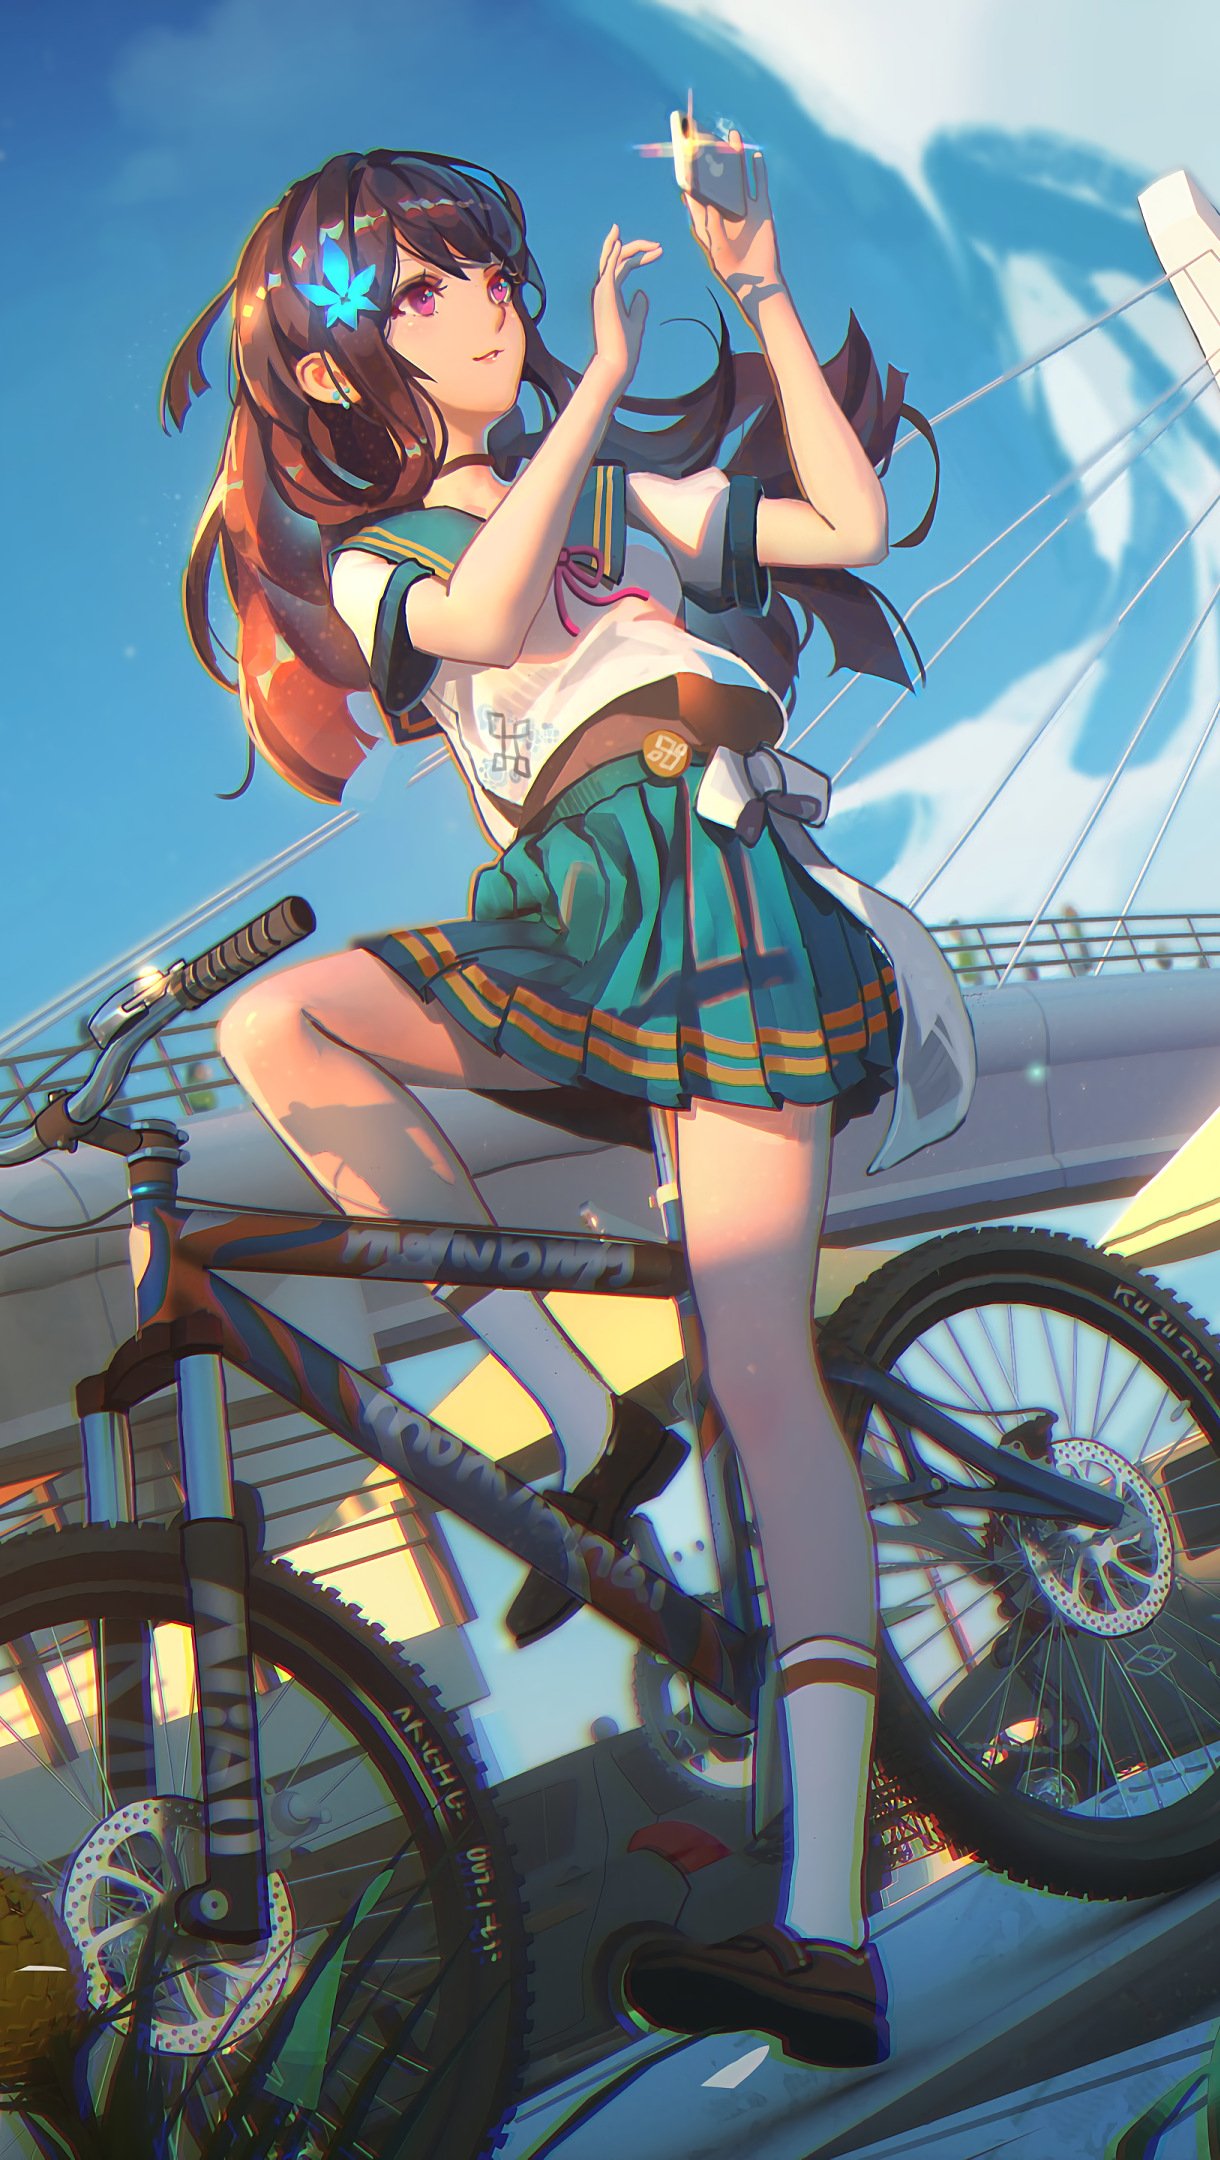 Anime student girl on a bicycle Wallpaper 4k Ultra HD ID3722